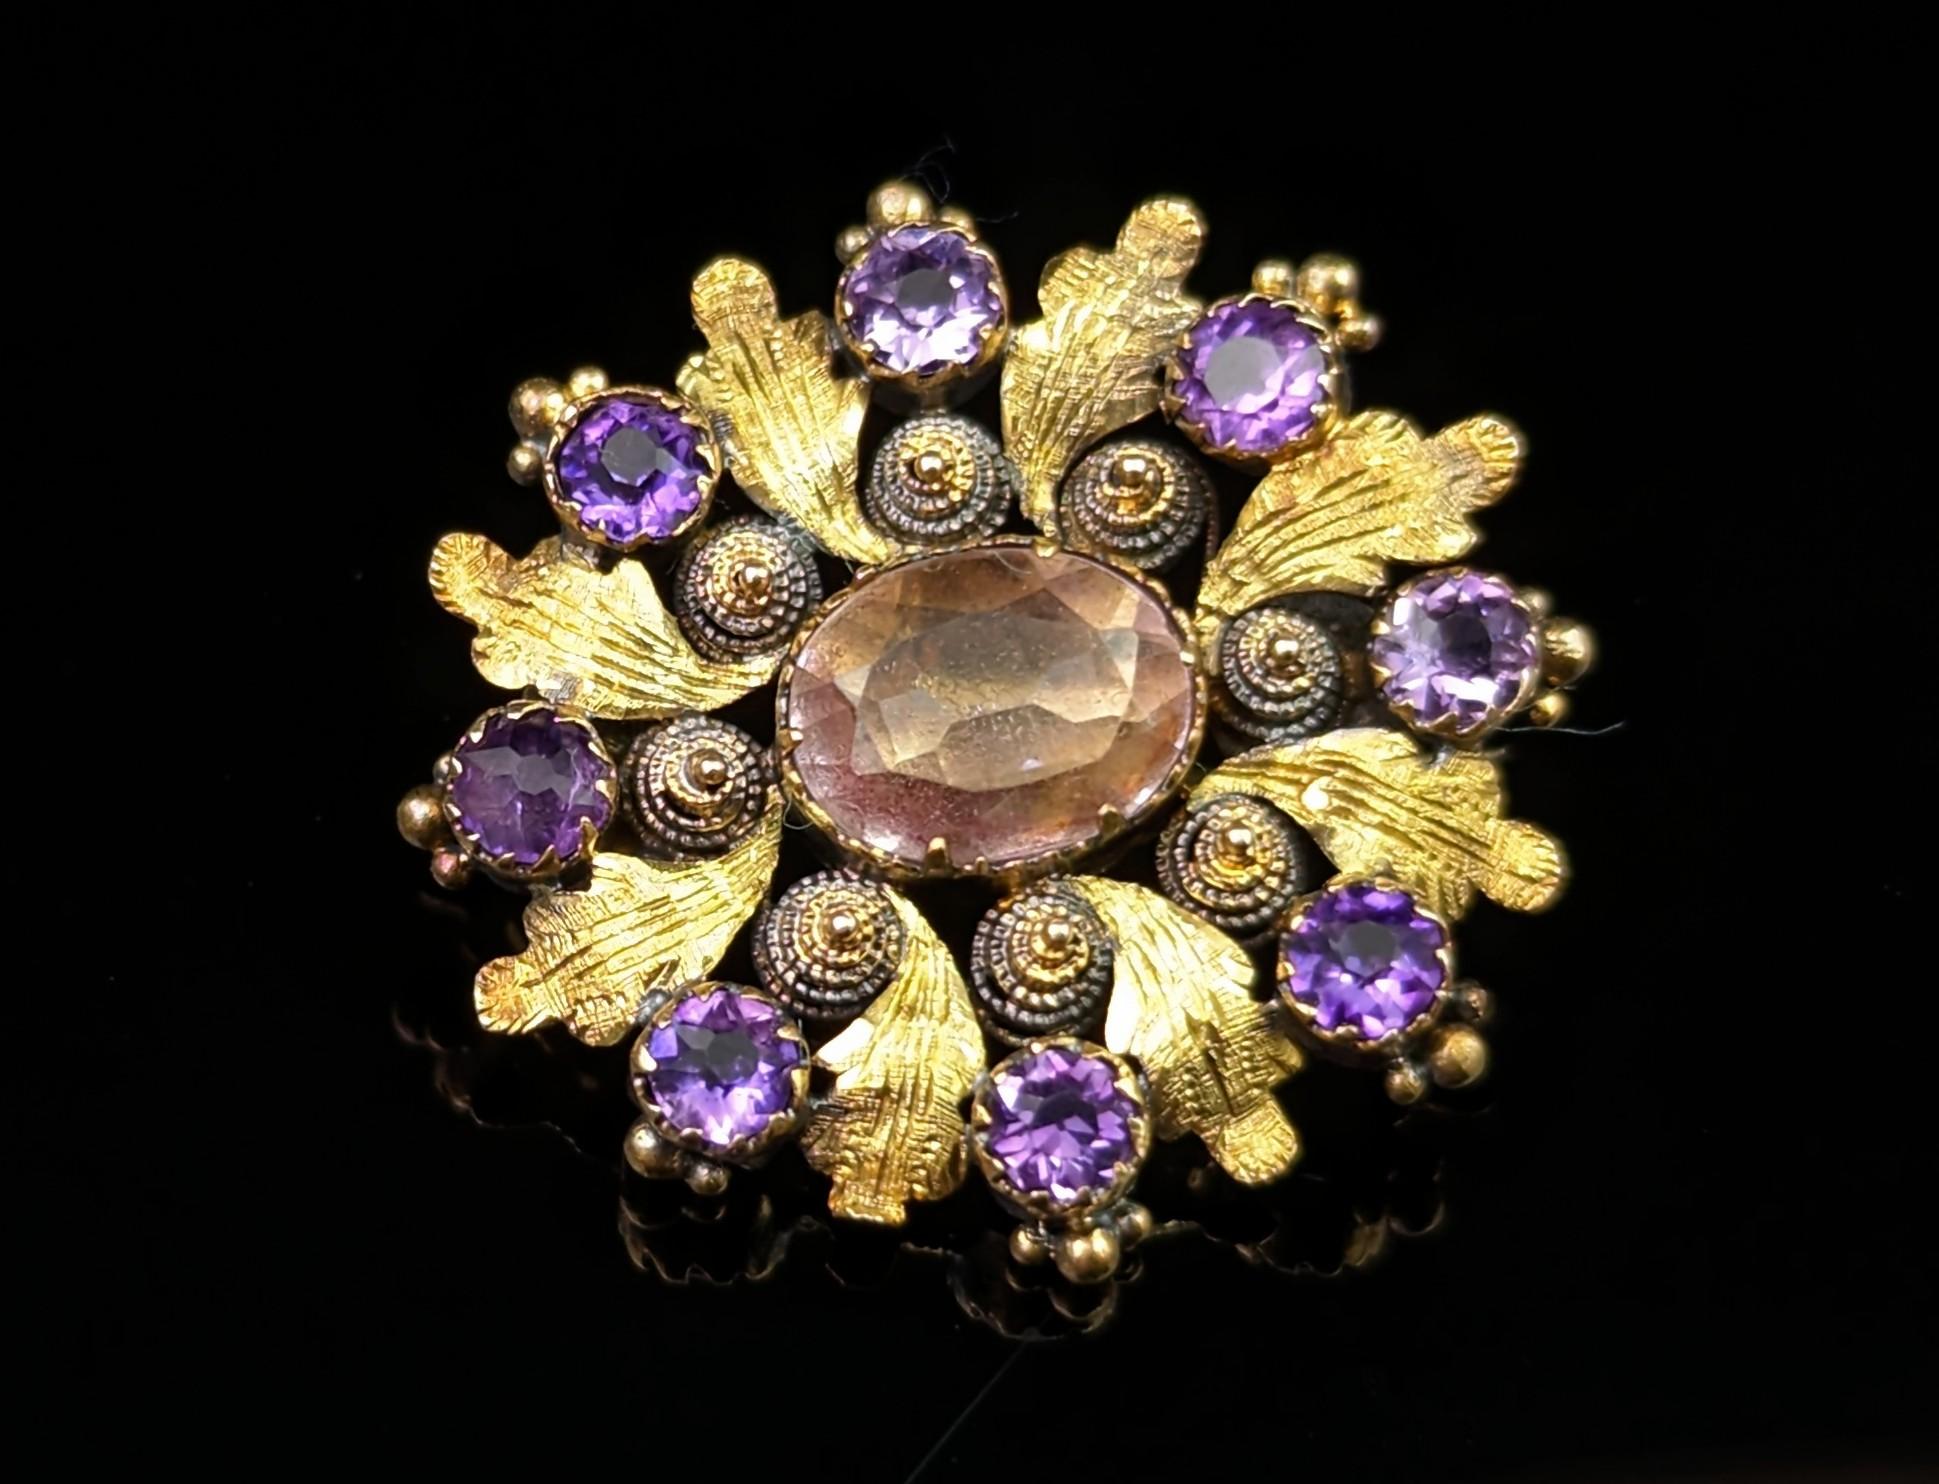 You cannot help but be charmed by this luxurious antique Georgian Amethyst and cannetille worn brooch.

There is something extra special about antique
cannetille pieces, the tiny details and the hours of work that went into creating such delicate